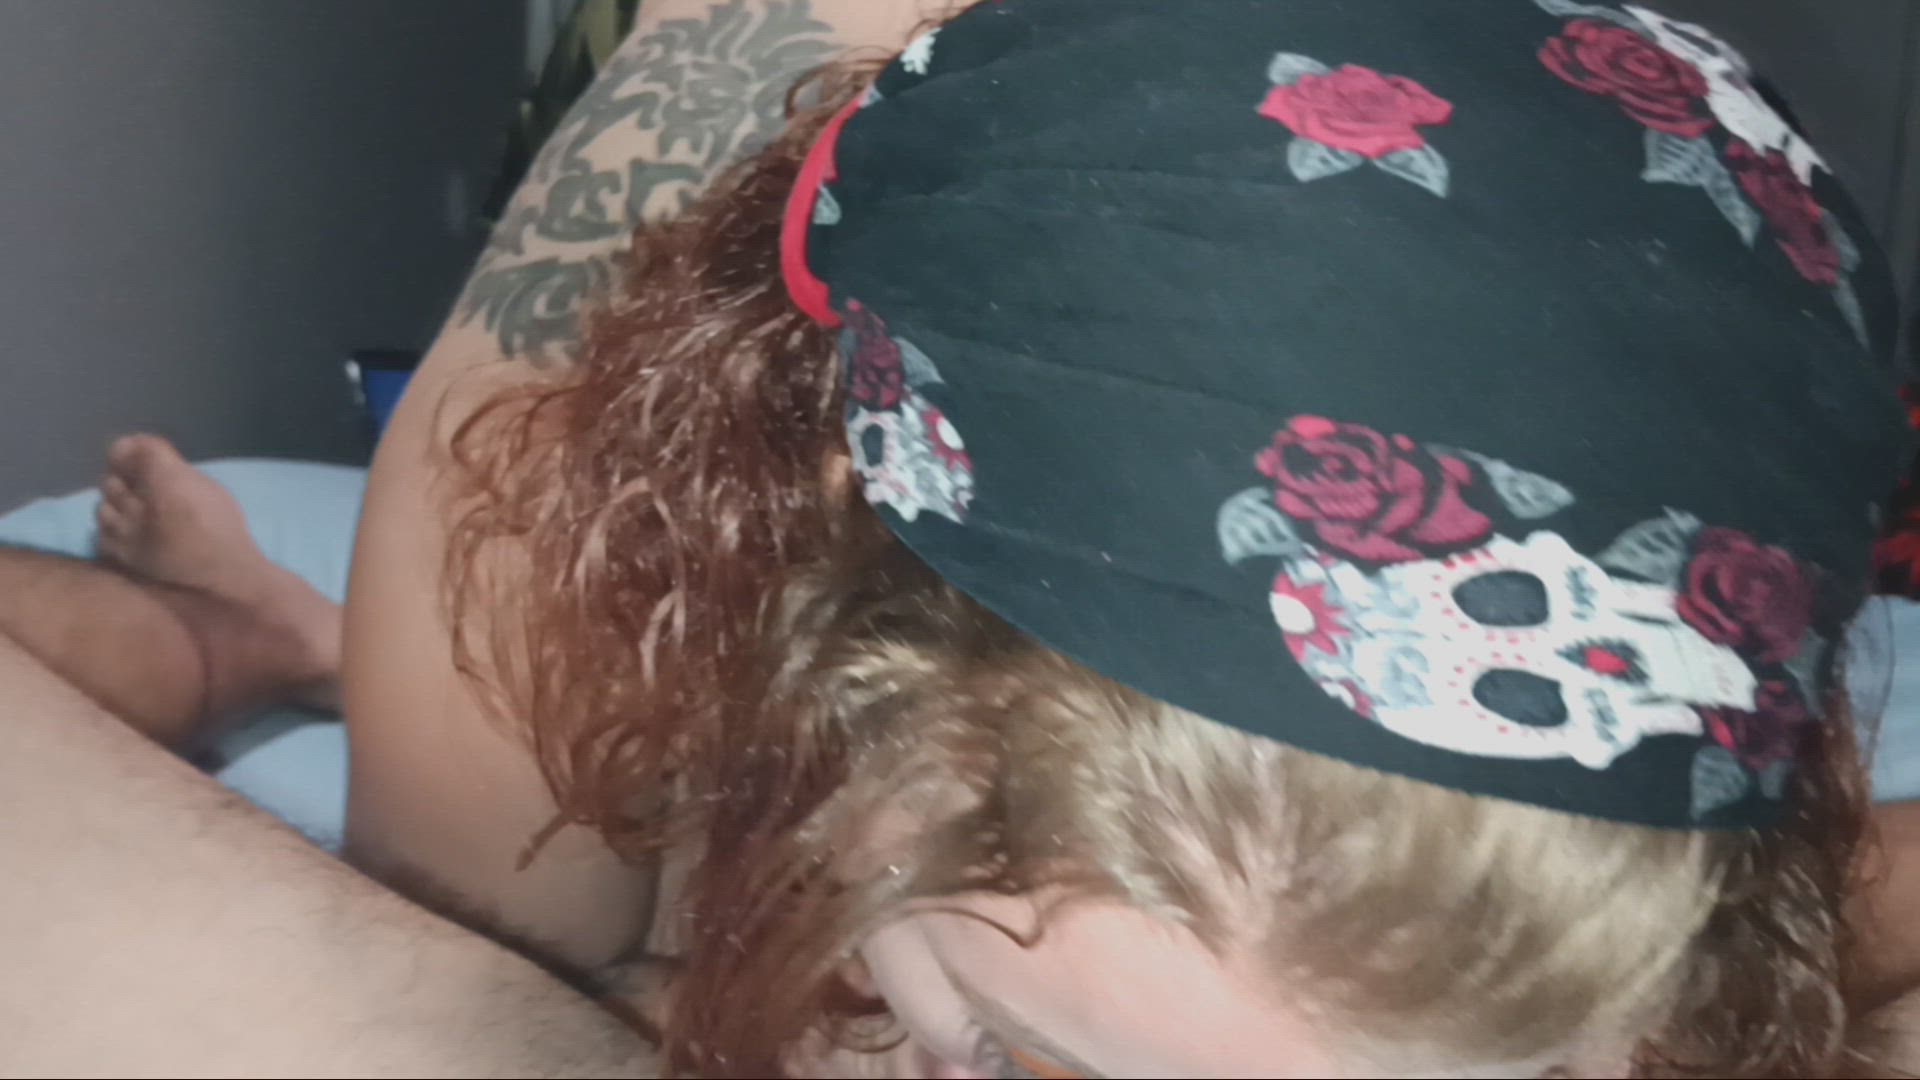 Ass porn video with onlyfans model alayahxx <strong>@sweet.fantasy20</strong>